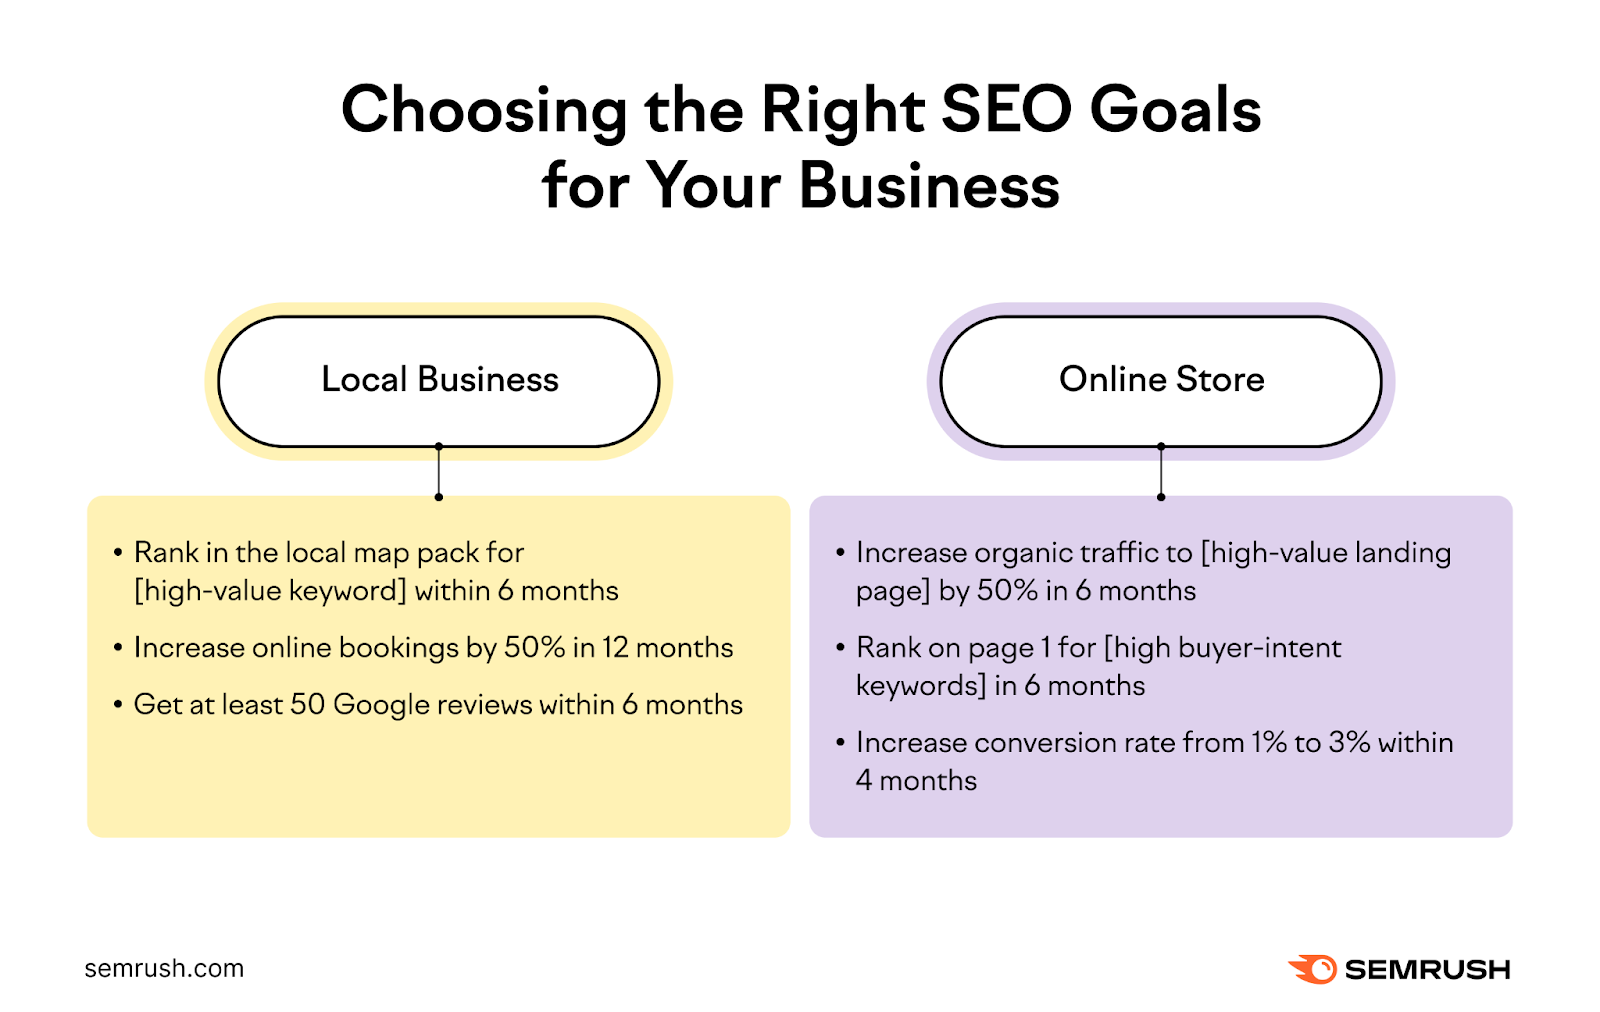 Choosing the right SEO goals for your business